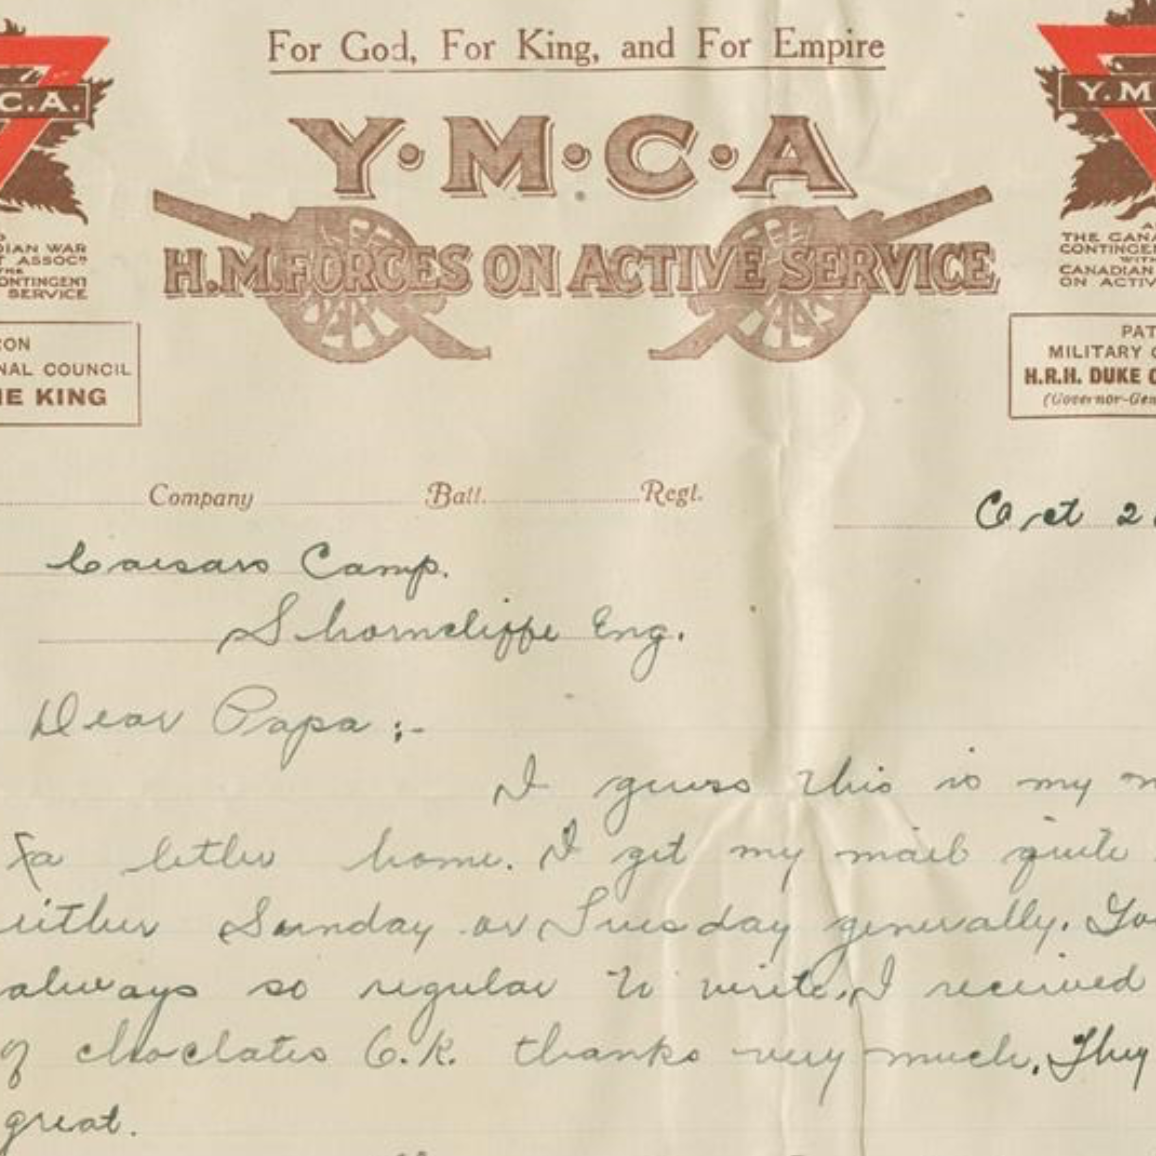 Letter from Archie to his father, handwritten on YMCA letterhead.